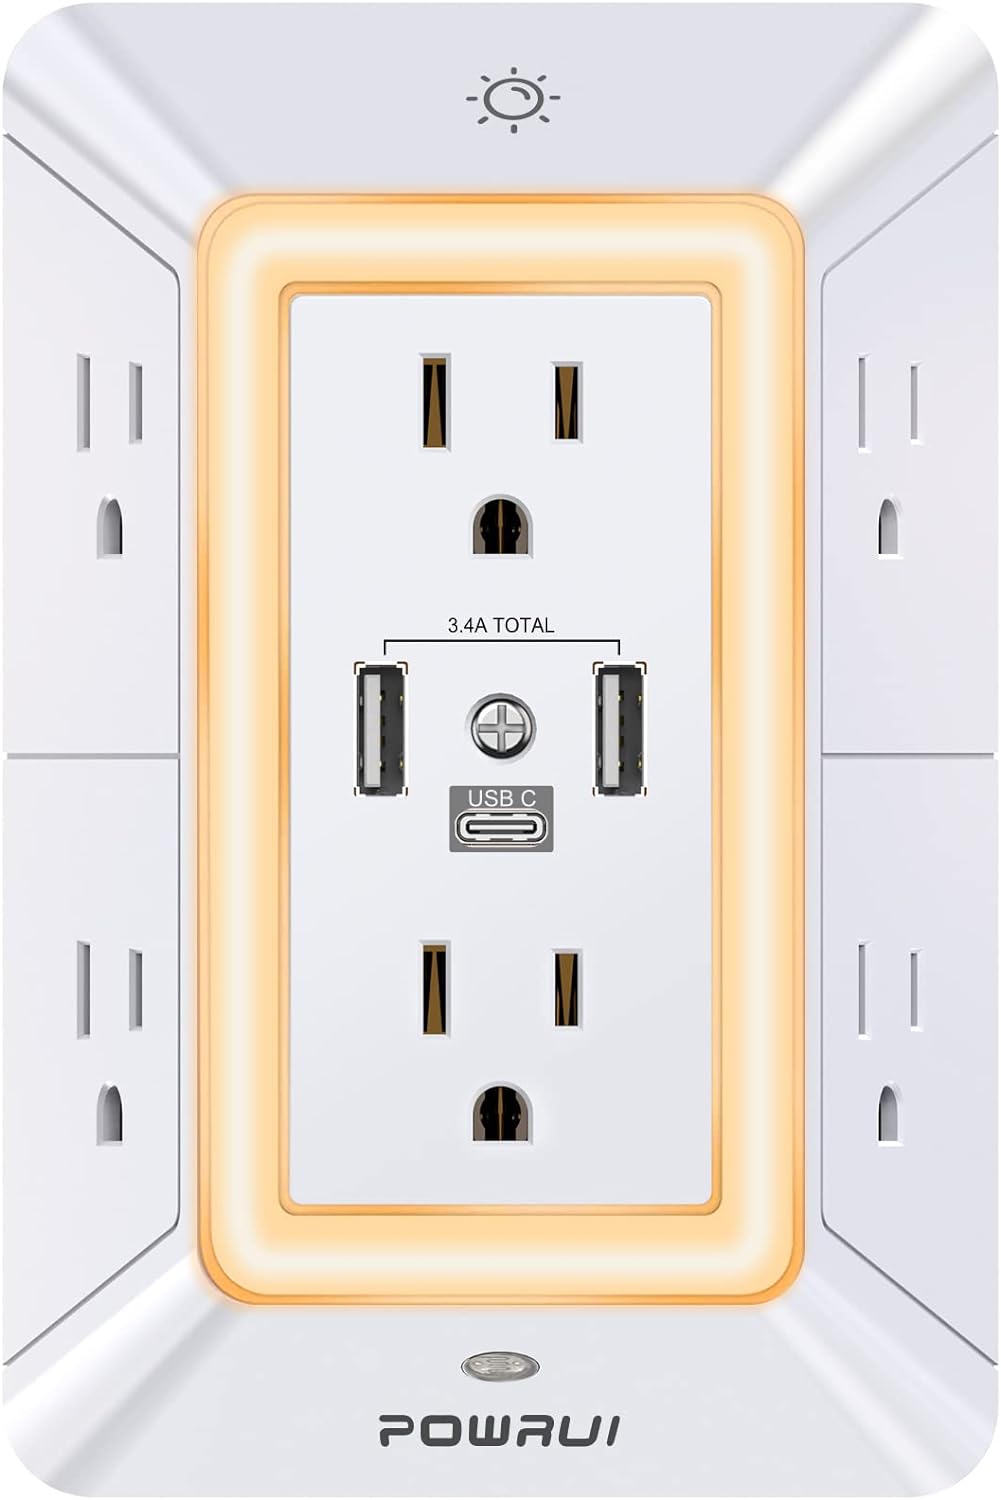 Multi Plug Outlet Surge Protector - POWRUI 6 Outlet Extender with 3 USB Ports (1 USB C) and Night Light, 3-Sided Power Strip with Adapter Spaced Outlets - White，ETL Listed